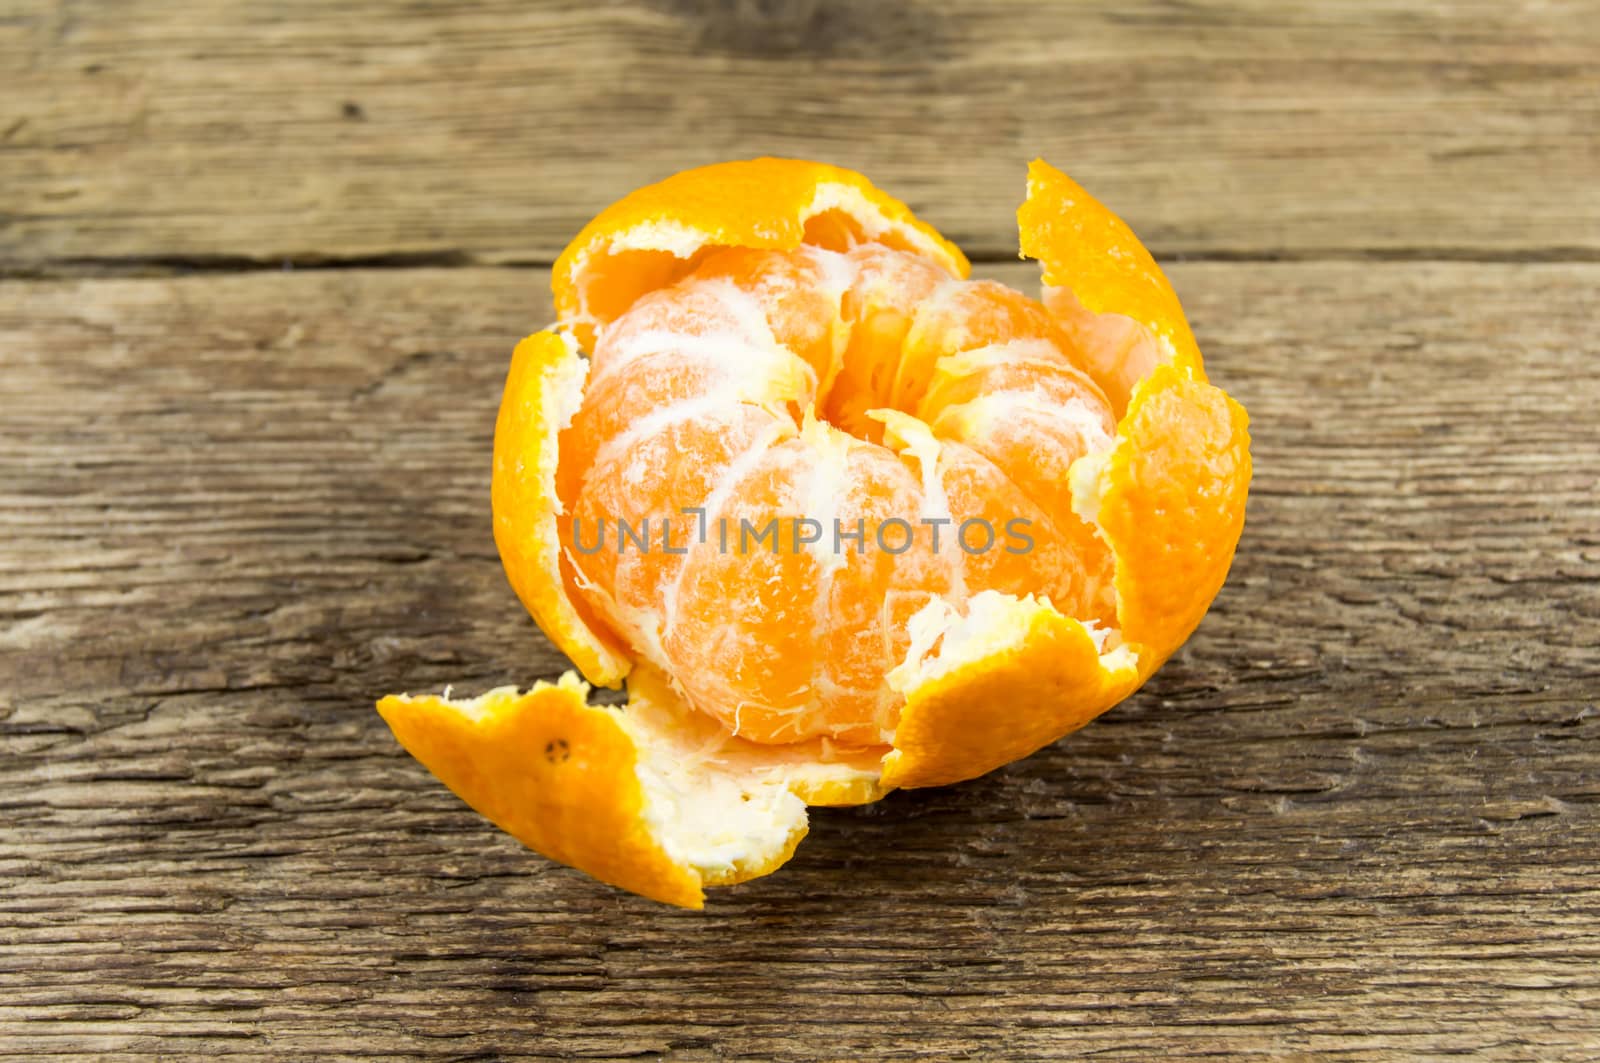 Ripe tangerines lie on a wooden background.